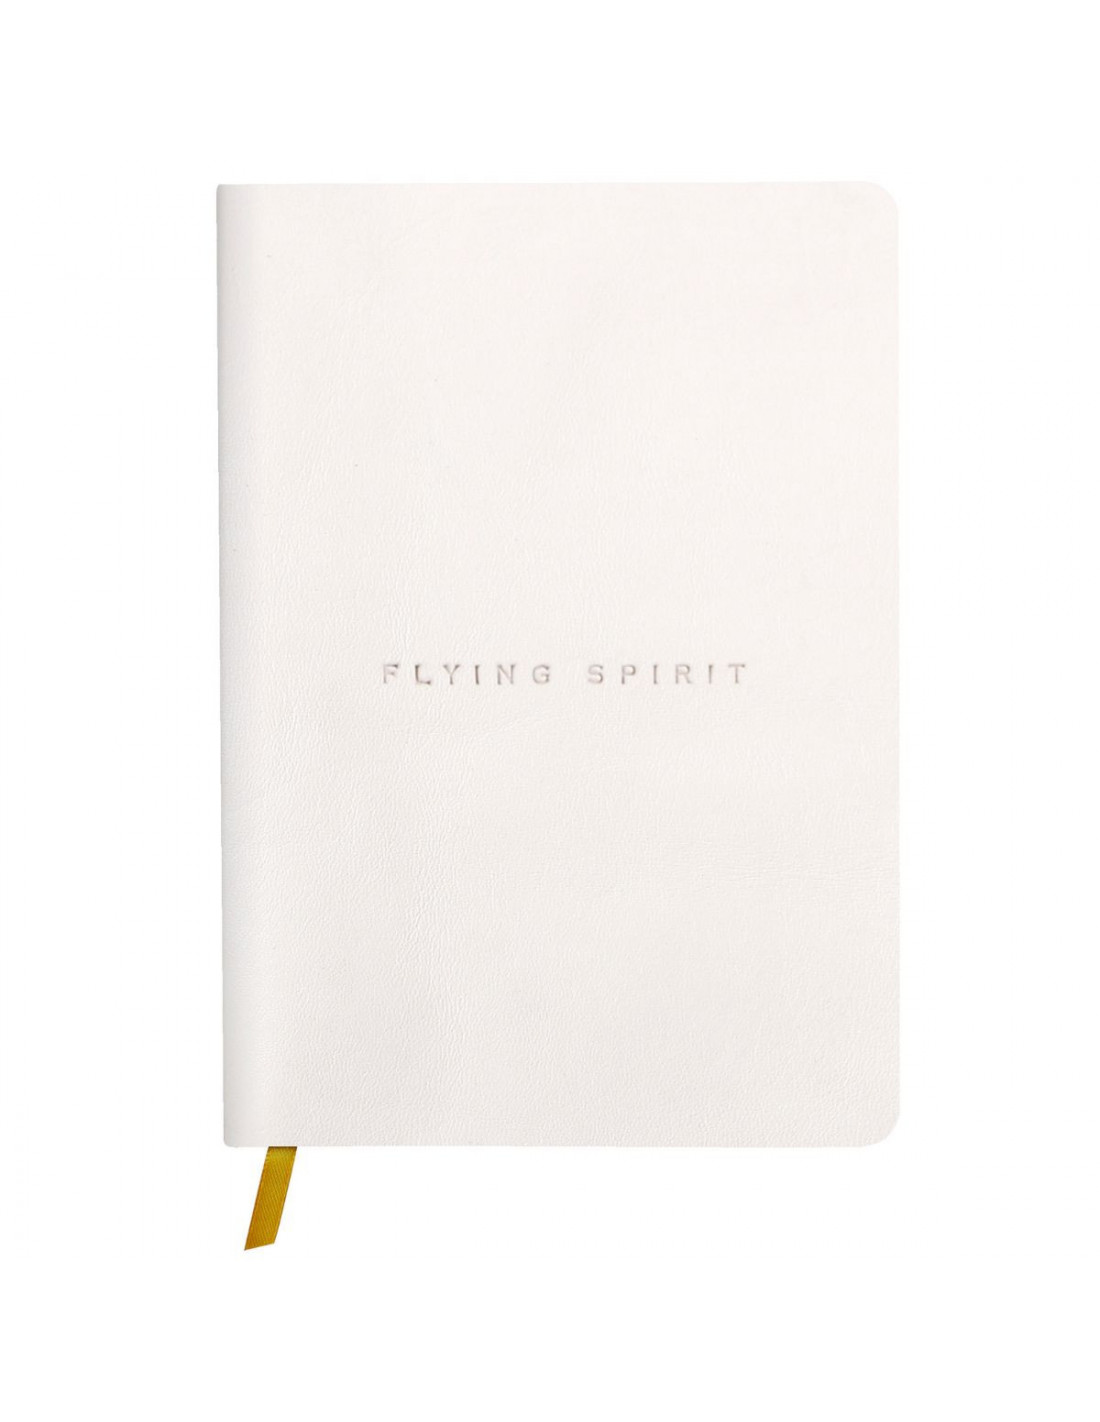 Carnet Flying Spirit Leather Collection - Cuir lisse BLANC - Dot - Clairefontaine